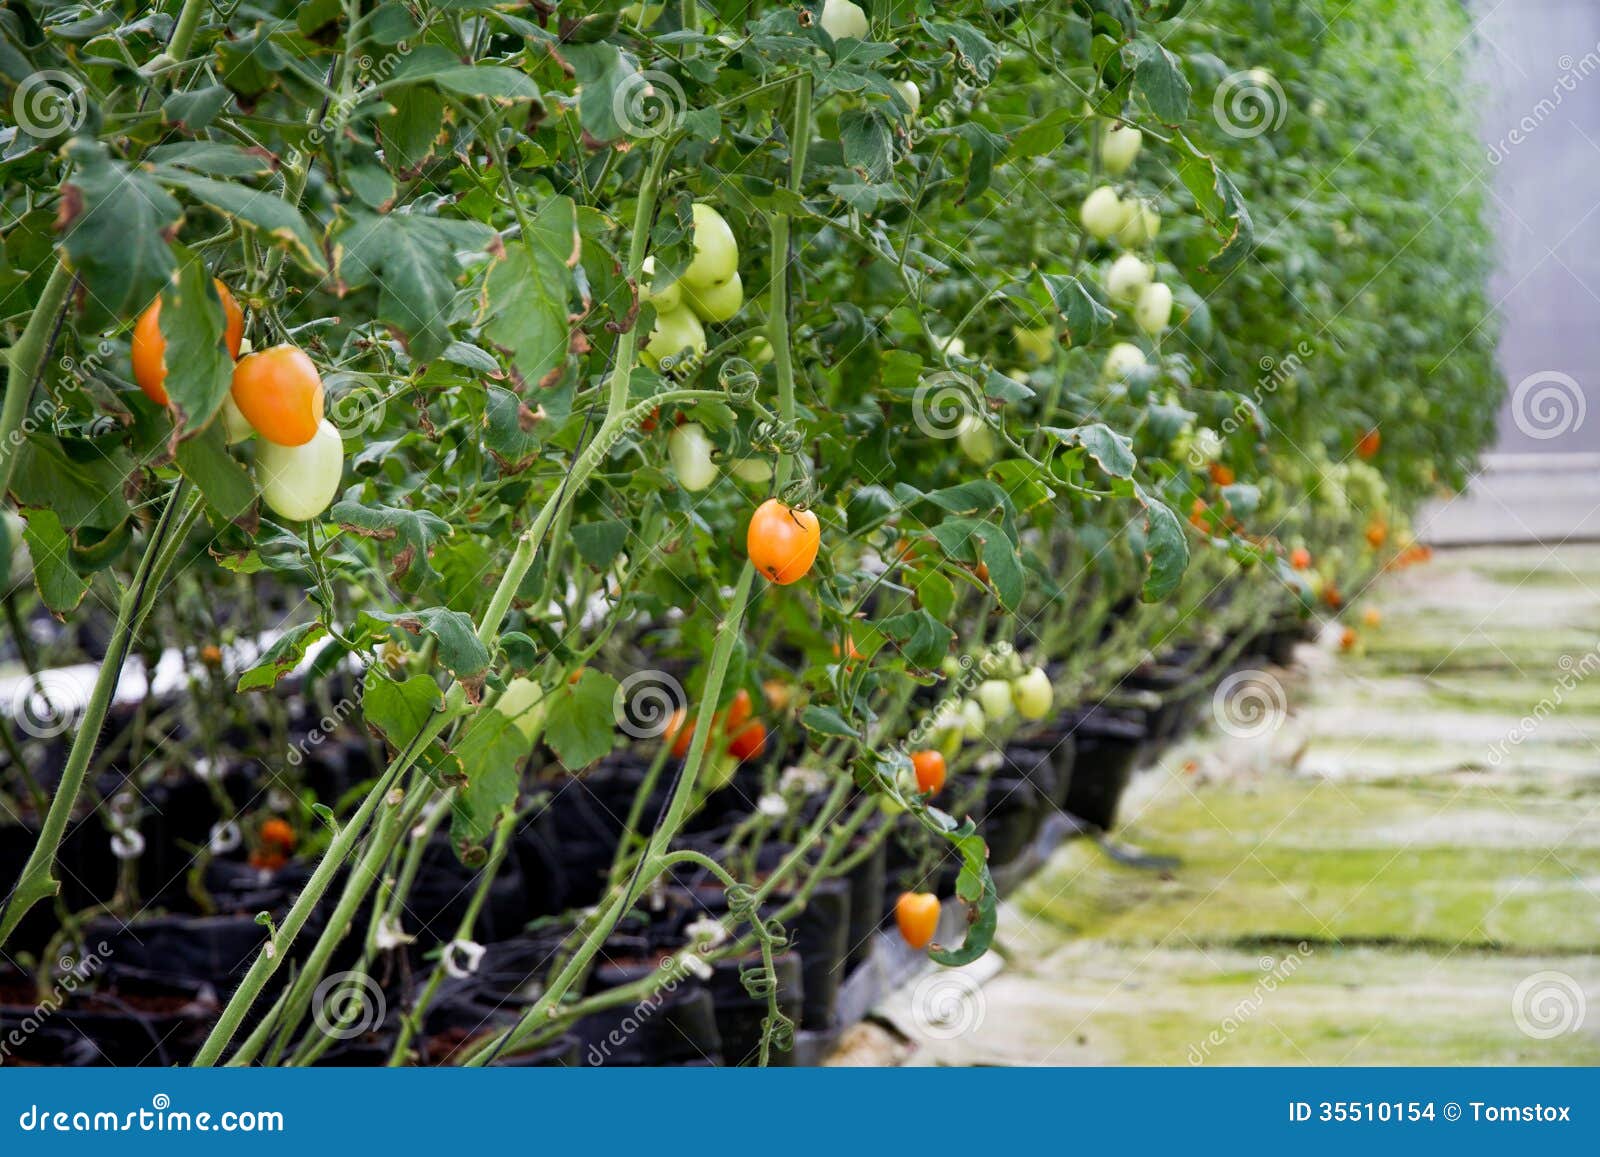 Tomatoes growing in a Commercial greenhouse using a hydroponics system ...